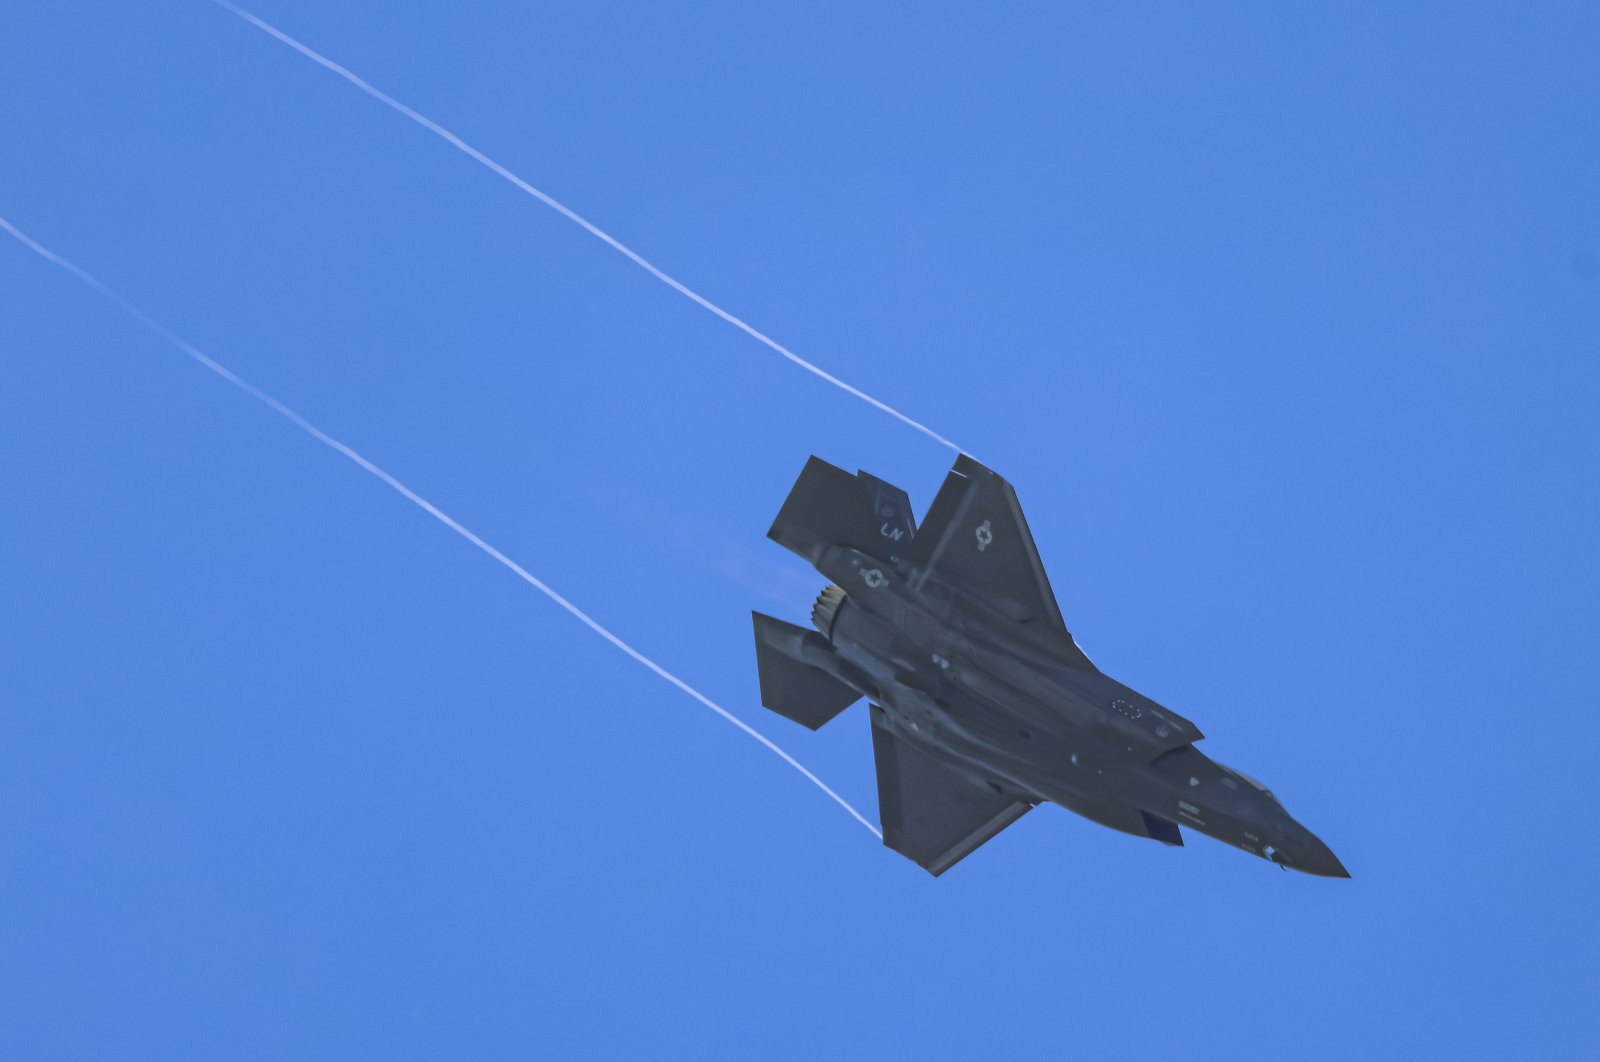 A Lockheed Martin F-35 Lightning II fighter jet of the United States Air Force (USAF) during a flight demonstration at Paris Air Show 2023 in Le Bourget Airport, Paris, France, June 25, 2023. (Reuters Photo)